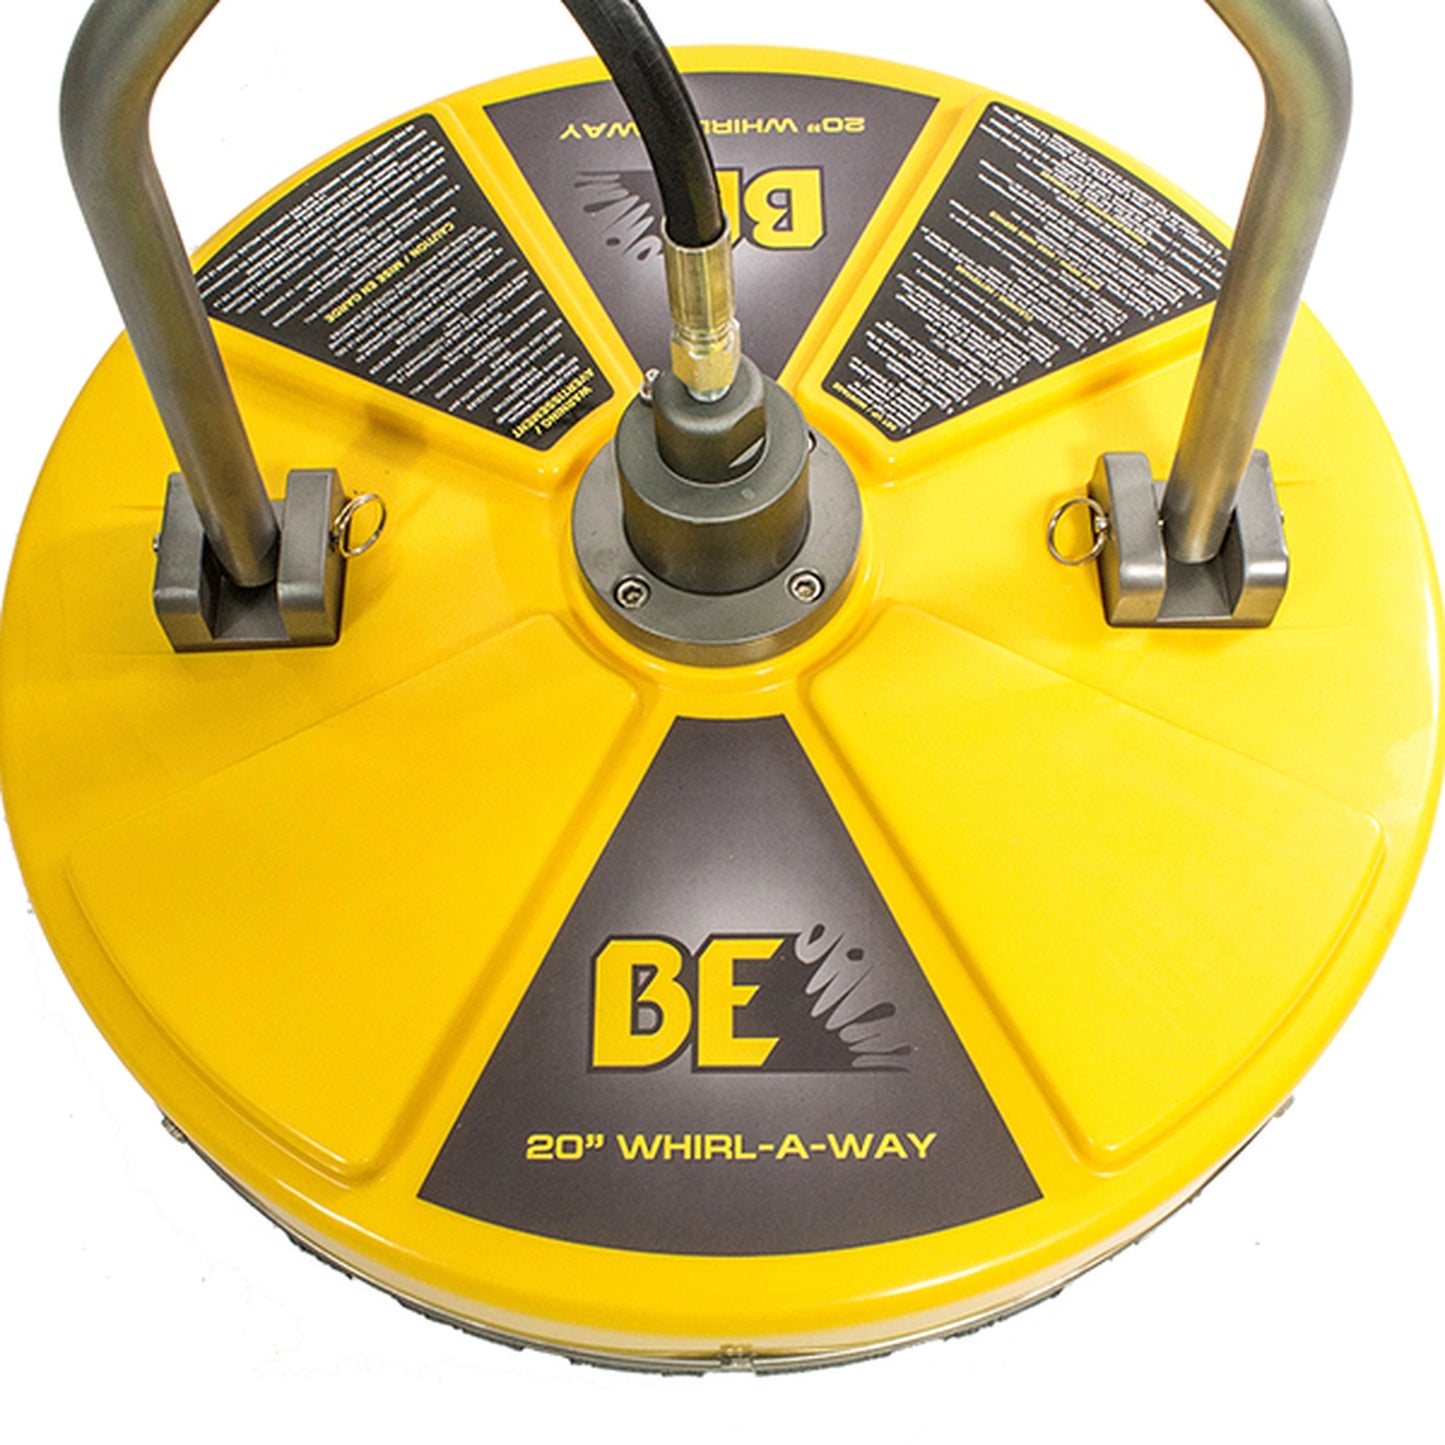 BE Pressure 85.403.007 Whirlaway Flat Surface Cleaner 20"